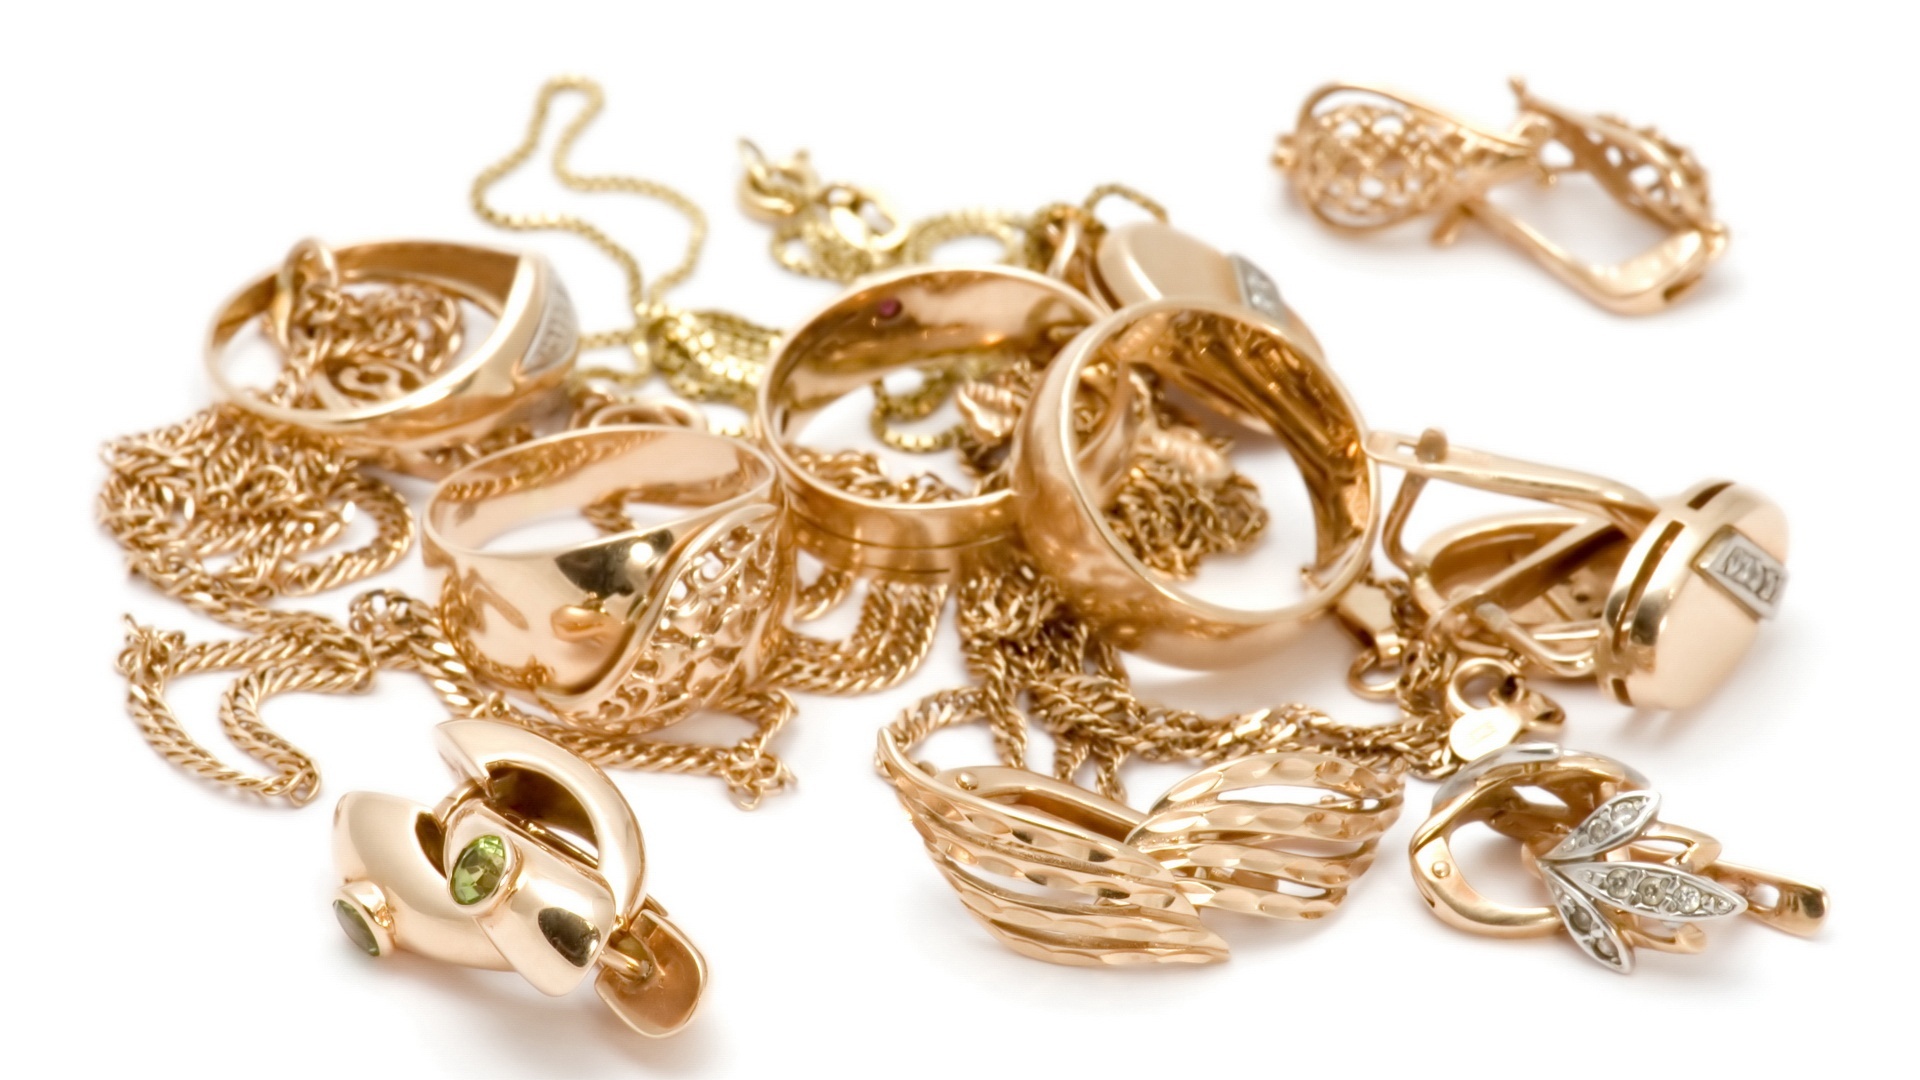 Selling Your Jewelry to Pawn Shops- How to Make The Most of It?